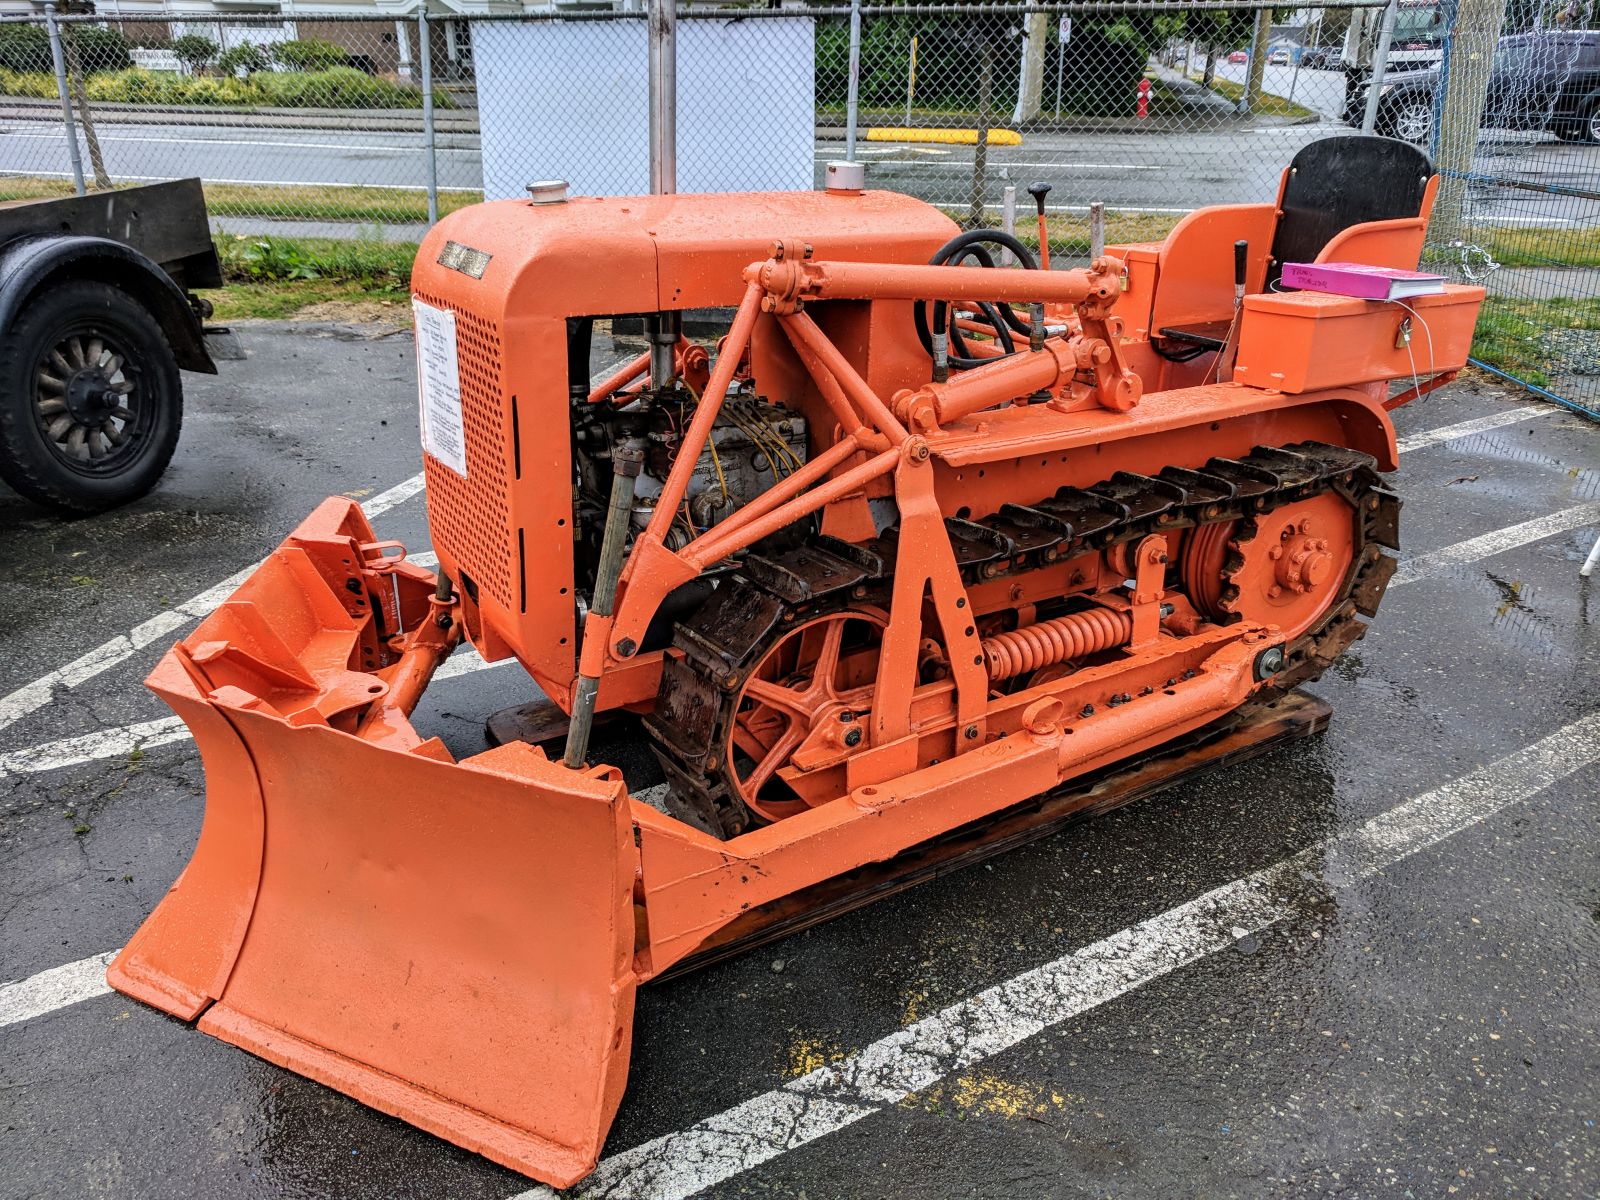 US Park Service Trail Clearing Tractor